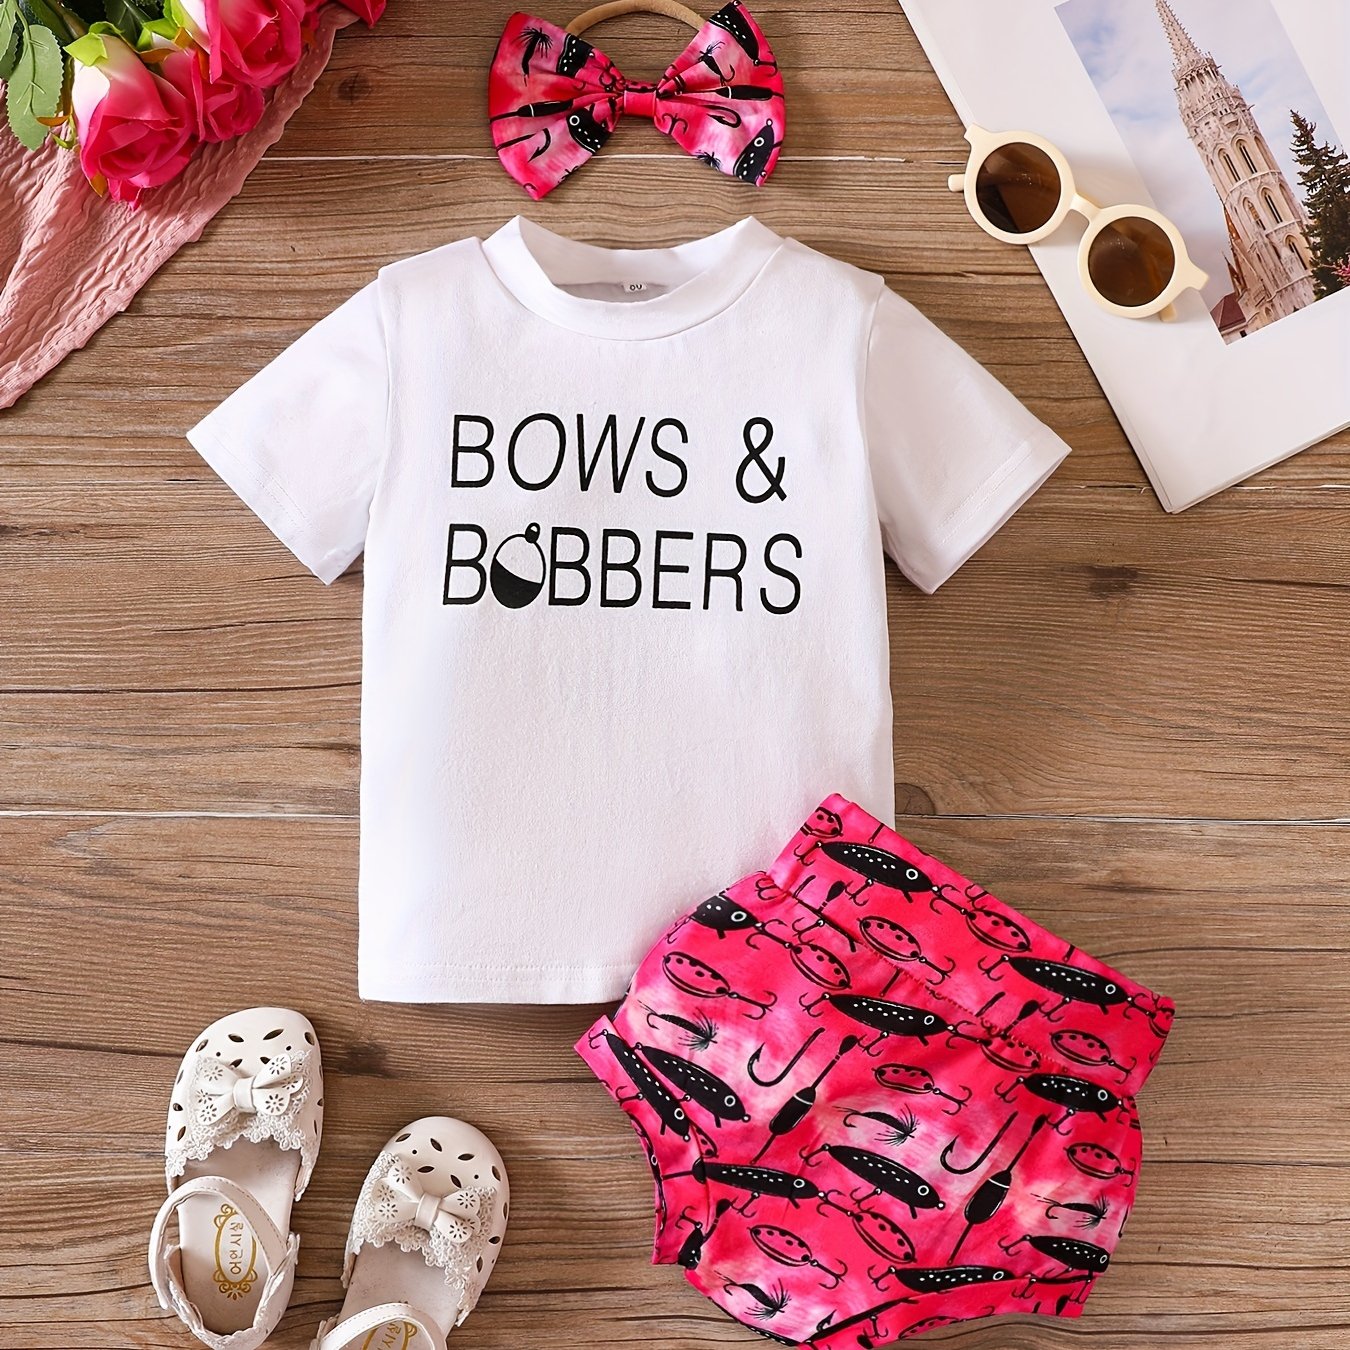 Toddler Baby Girls BOWS & BOBBERS Print T-shirt & Fishing Lure Bait  Shorts & Bow Hair Accessories Set Baby Clothes Outfit